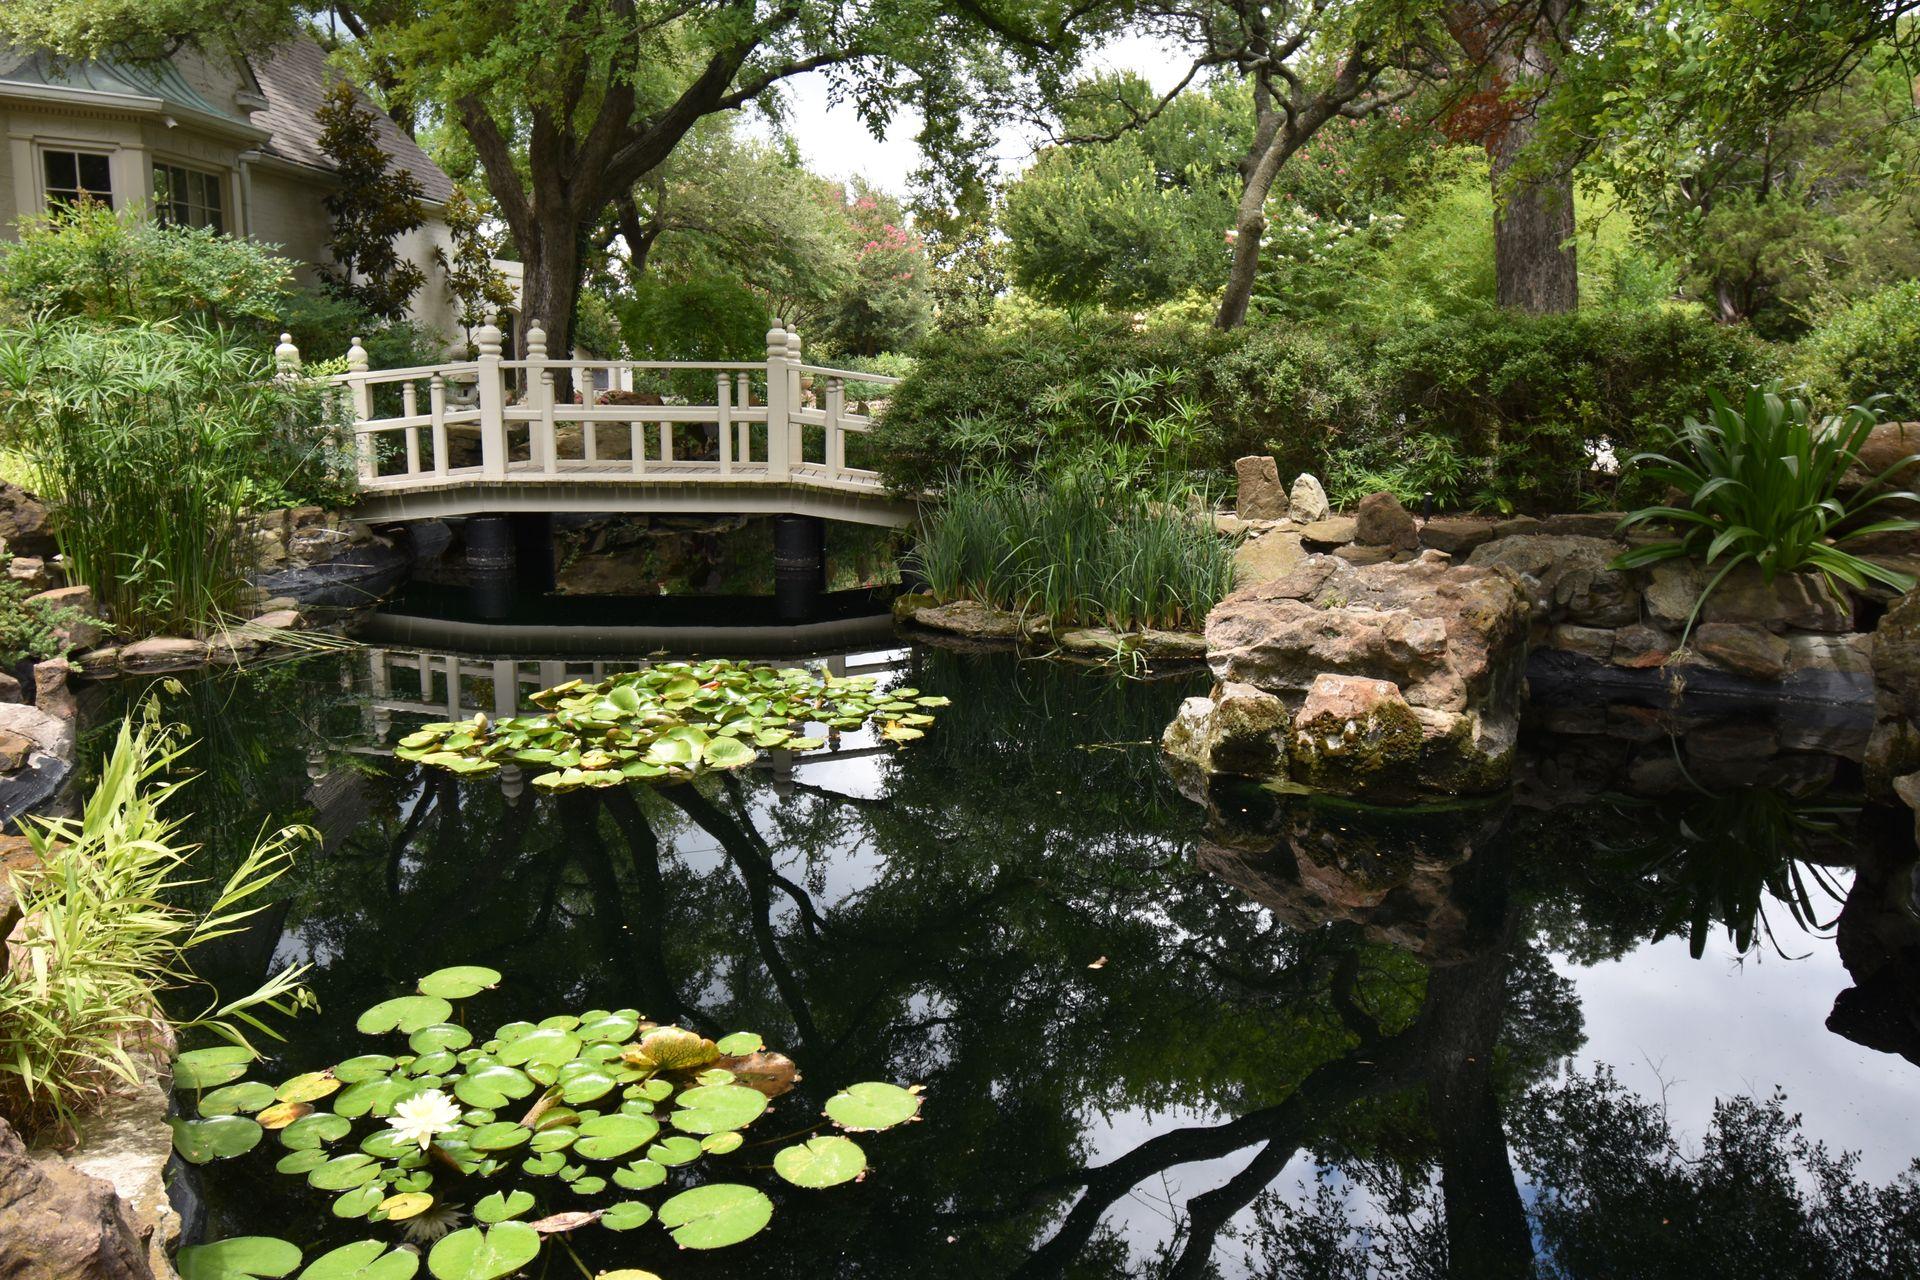 A pond with lily pads and a small bridge at Chandor Gardens.